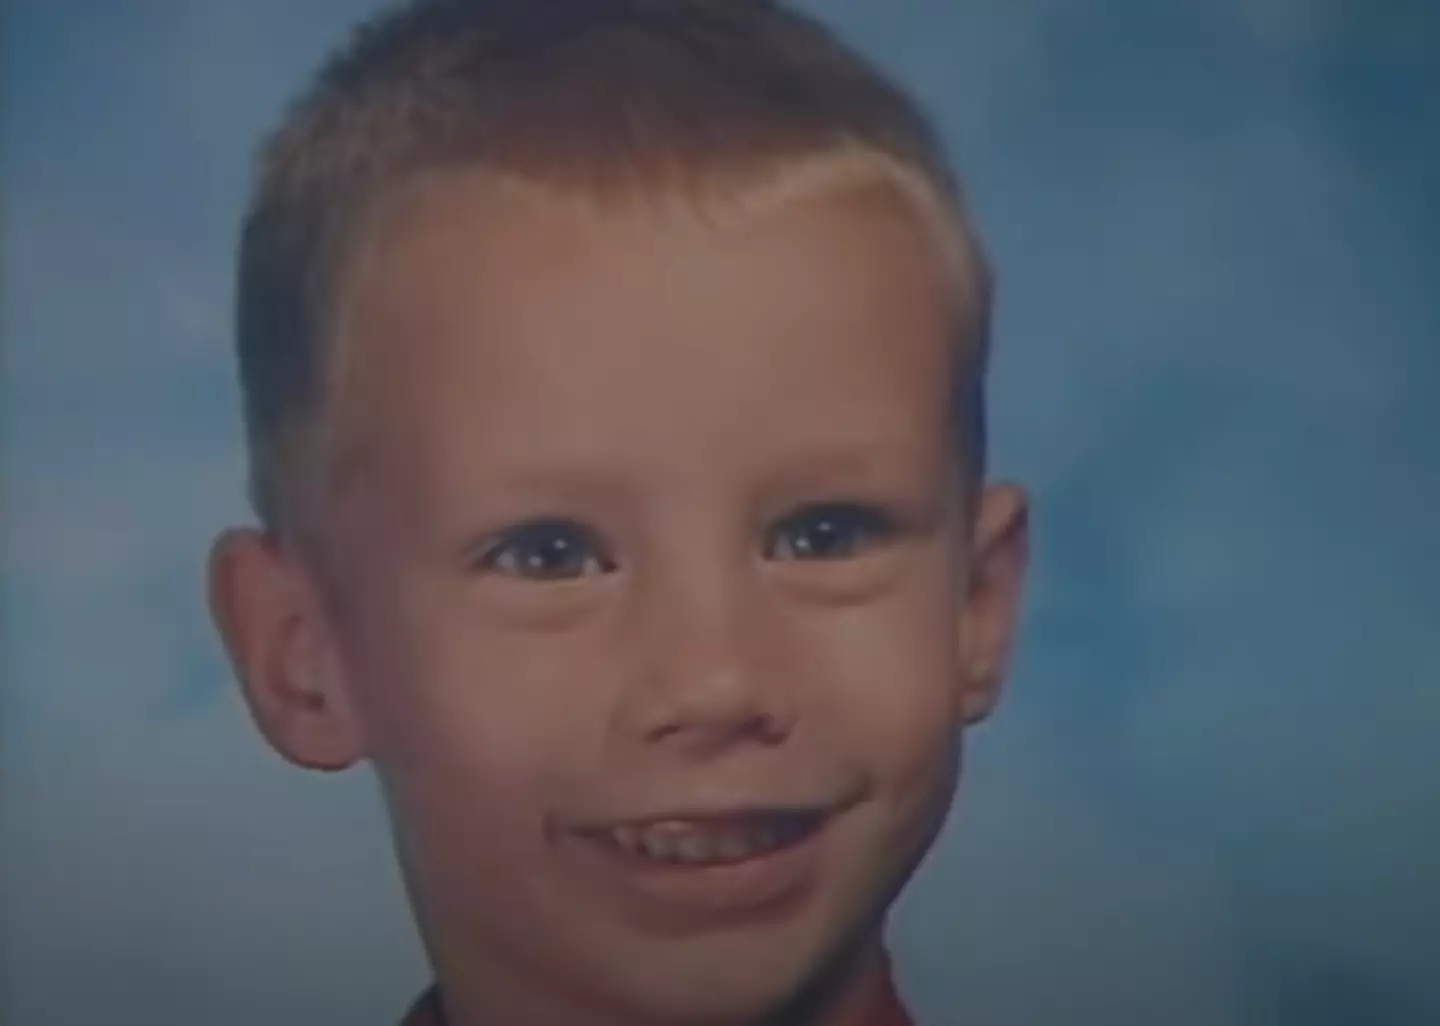 Five-year-old Justin Lee Turner had been 'missing' for two days.